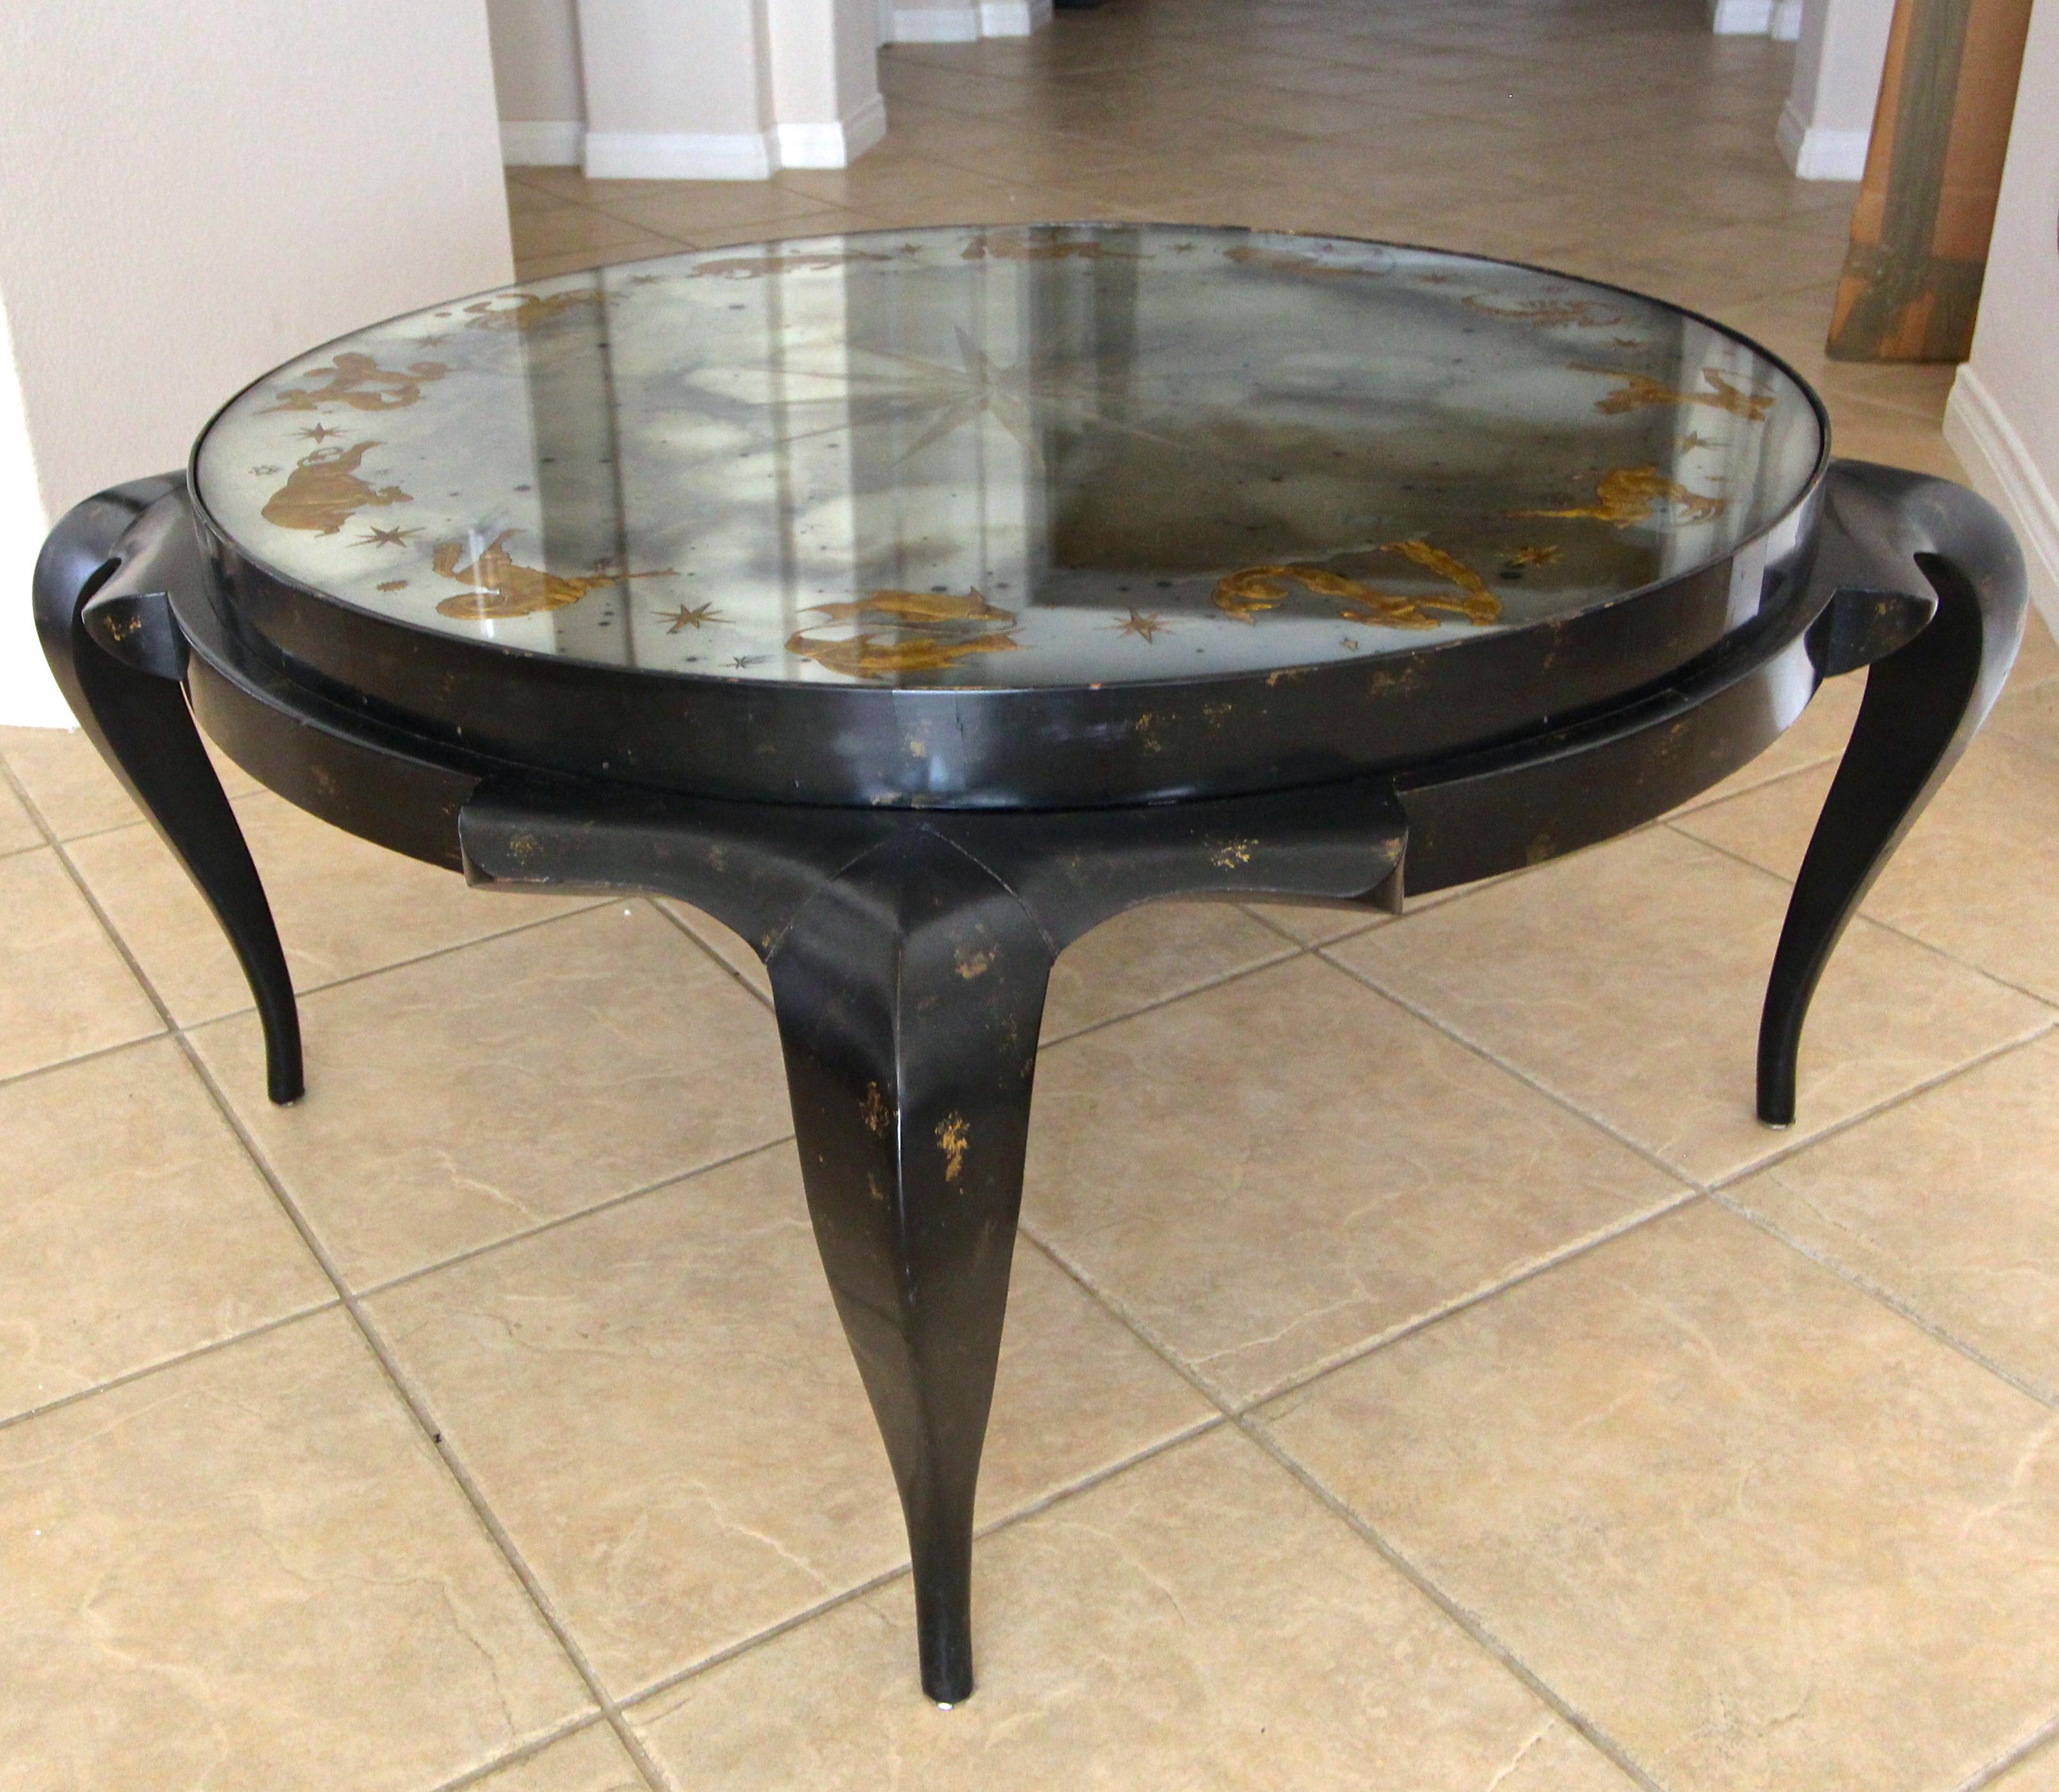 One of a kind Art Deco cocktail or coffee table by David Harriton for Harriton Carved Glass of New York, circa 1940. The smoked mirror top features a beautiful gold églomisé Zodiac pattern reverse carved into the glass by sandblasting, a process